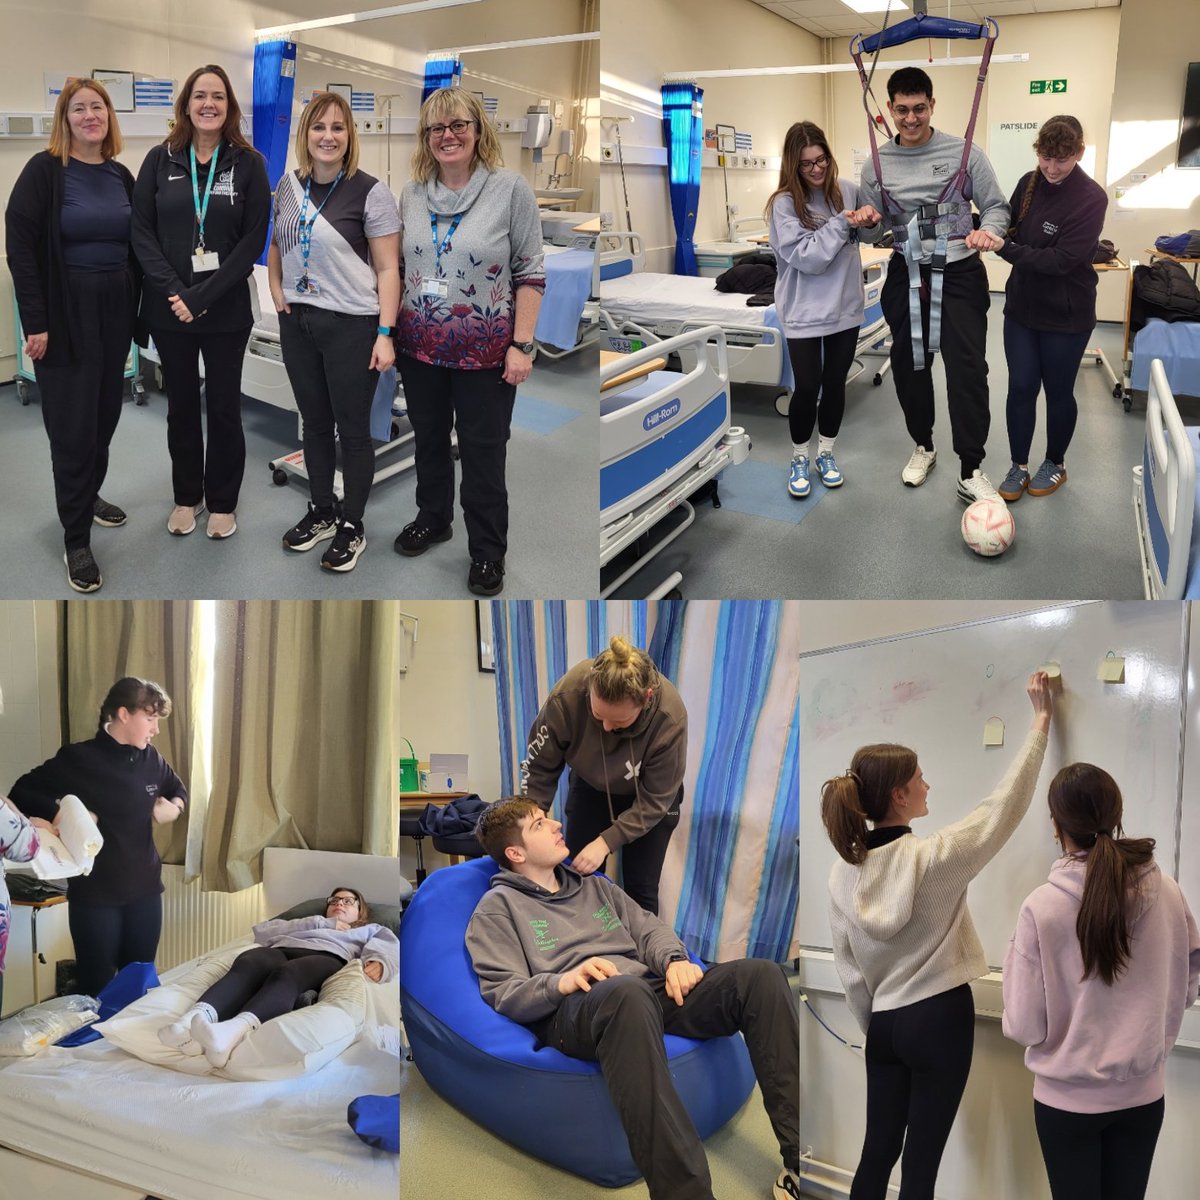 Great day teaching all things #LearningDisabilities #Physiotherapy to @UoC_Physio  3rd year BSc students today. A bit of serious stuff mixed with lots of fun, creative thinking & new knowledge & skills for the future
@WeAreLSCFT @nwacppld